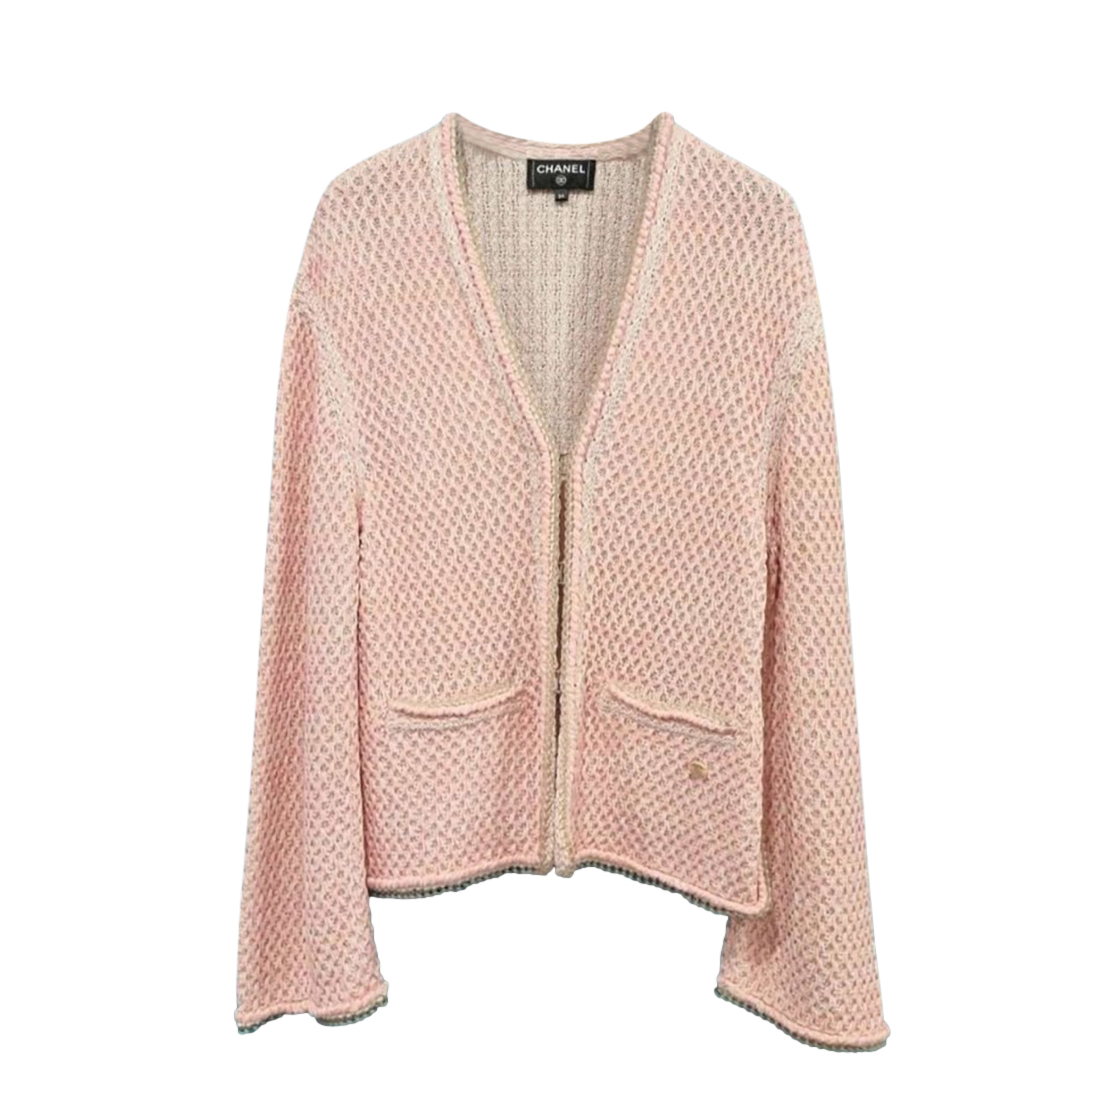 Chanel pale pink woven tweed data centre jacket